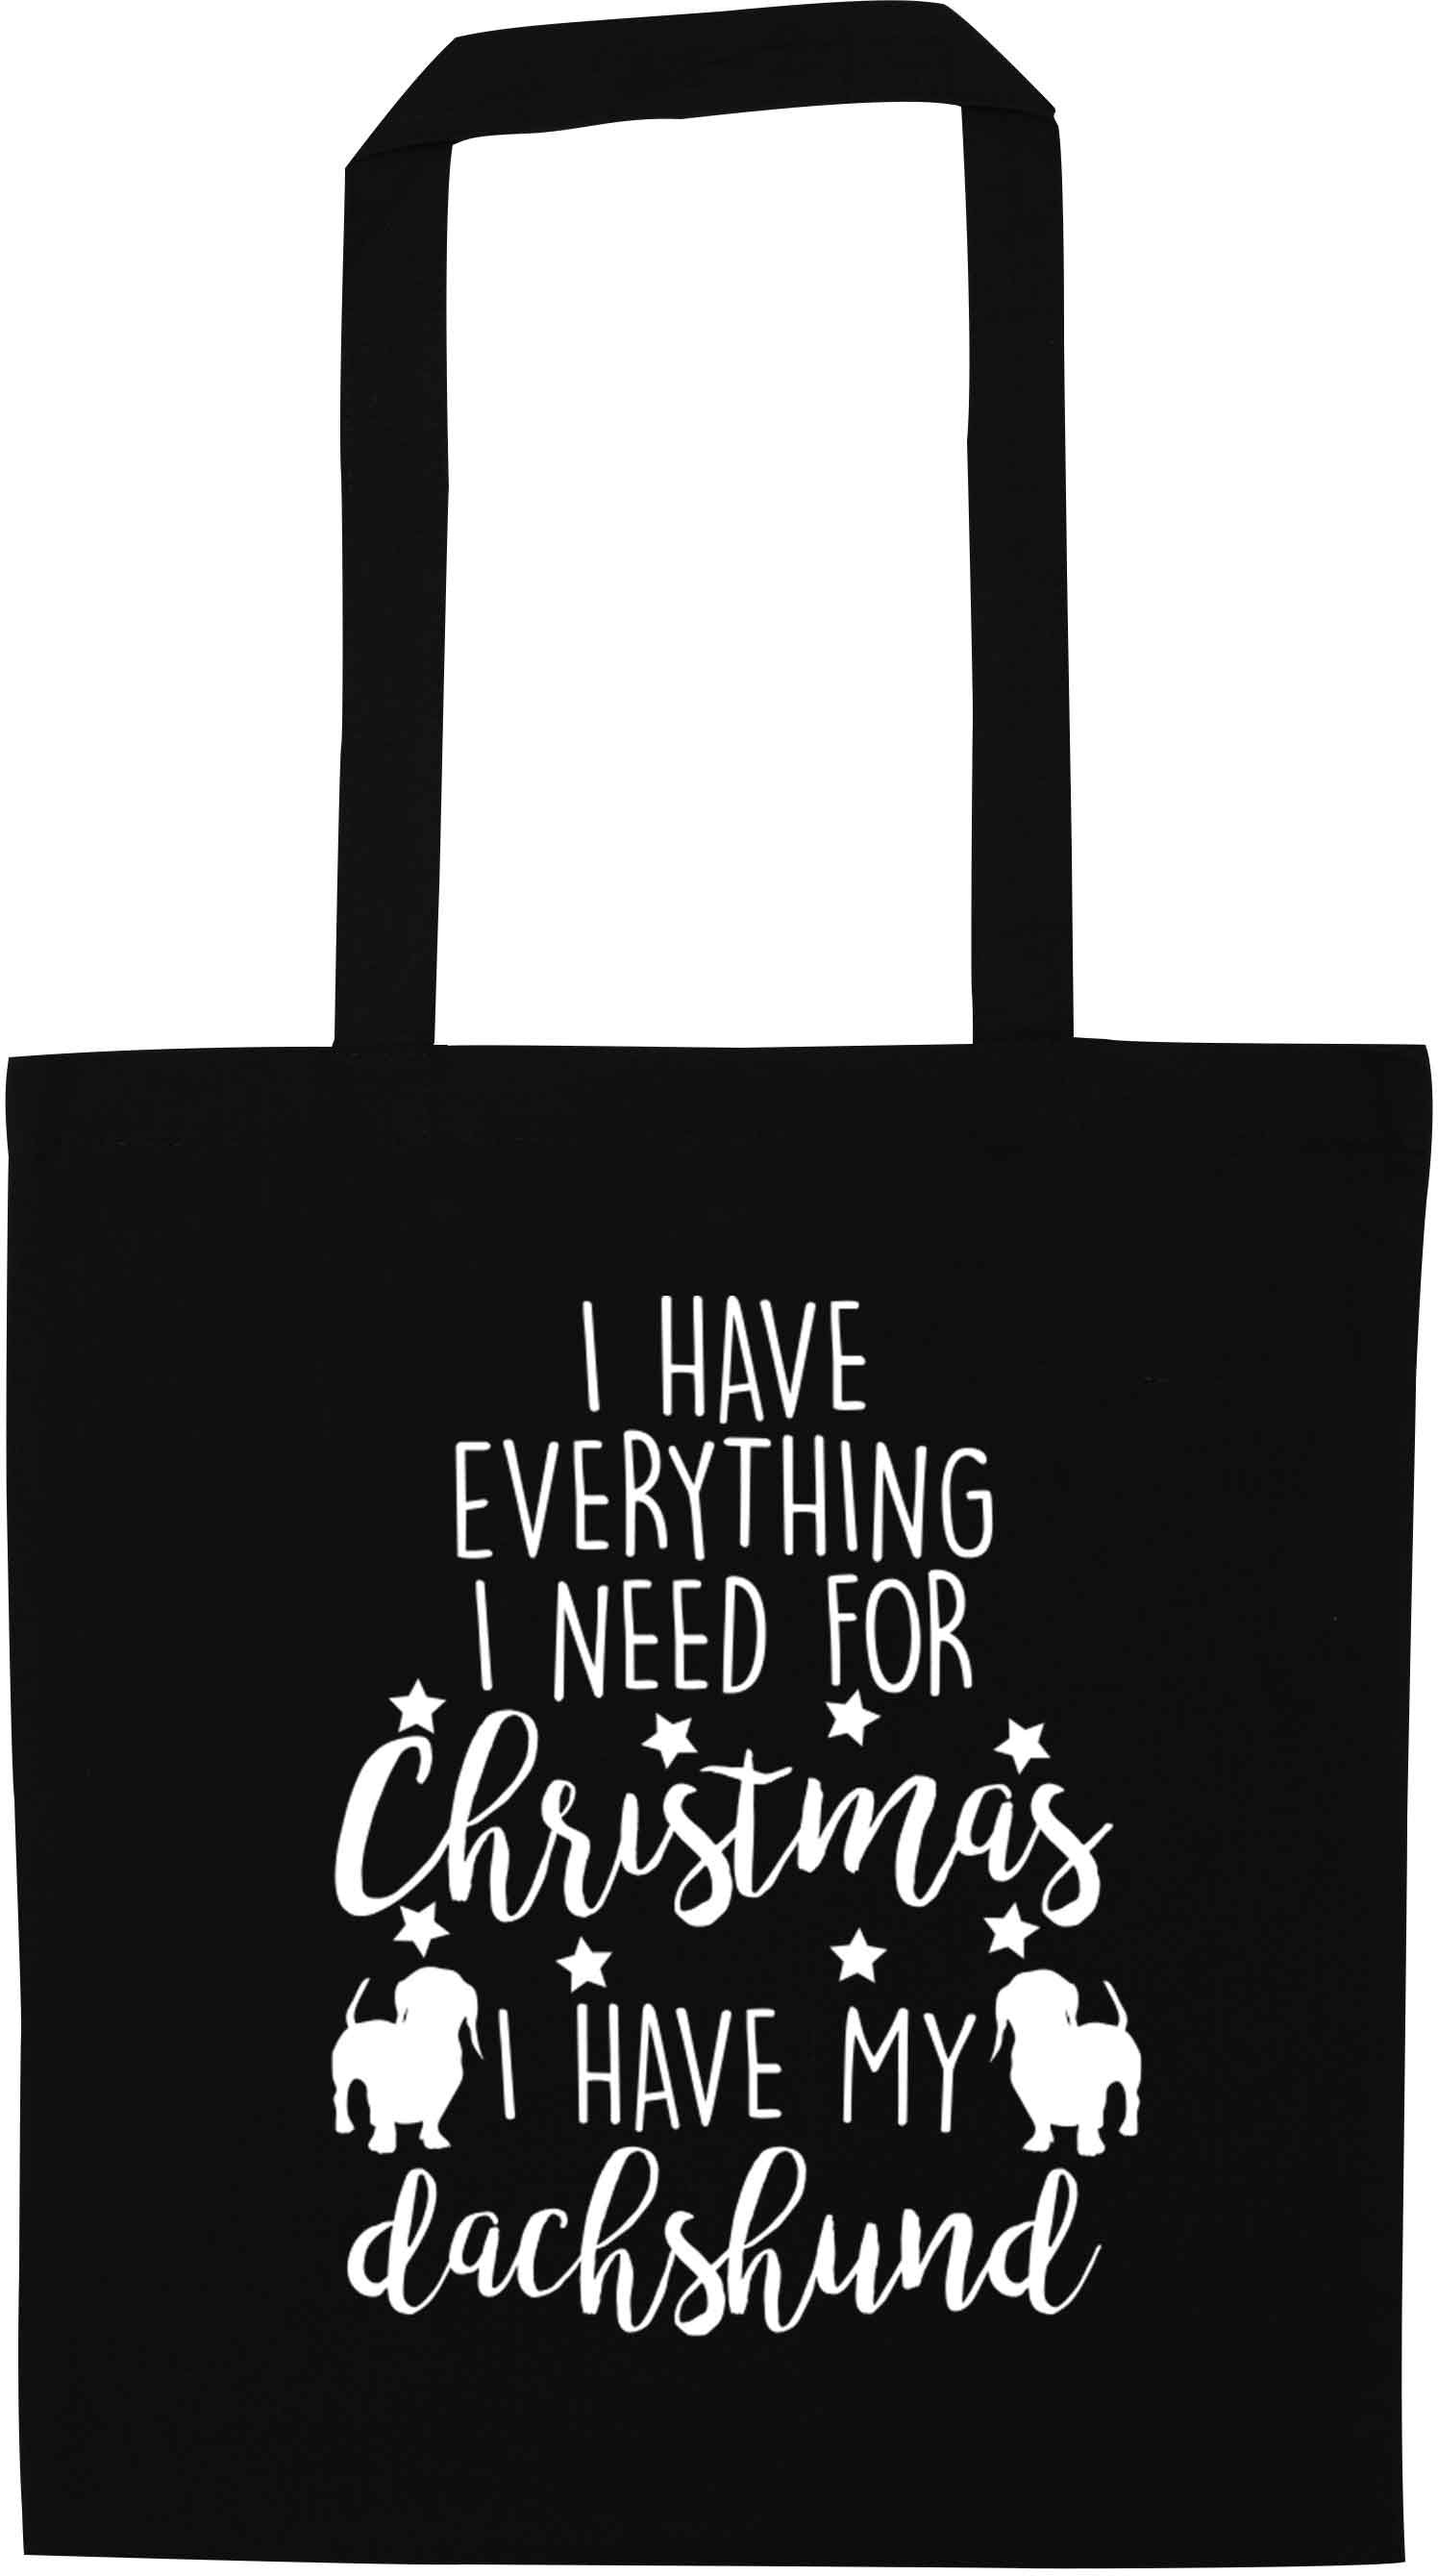 I have everything I need for Christmas I have my dachshund black tote bag